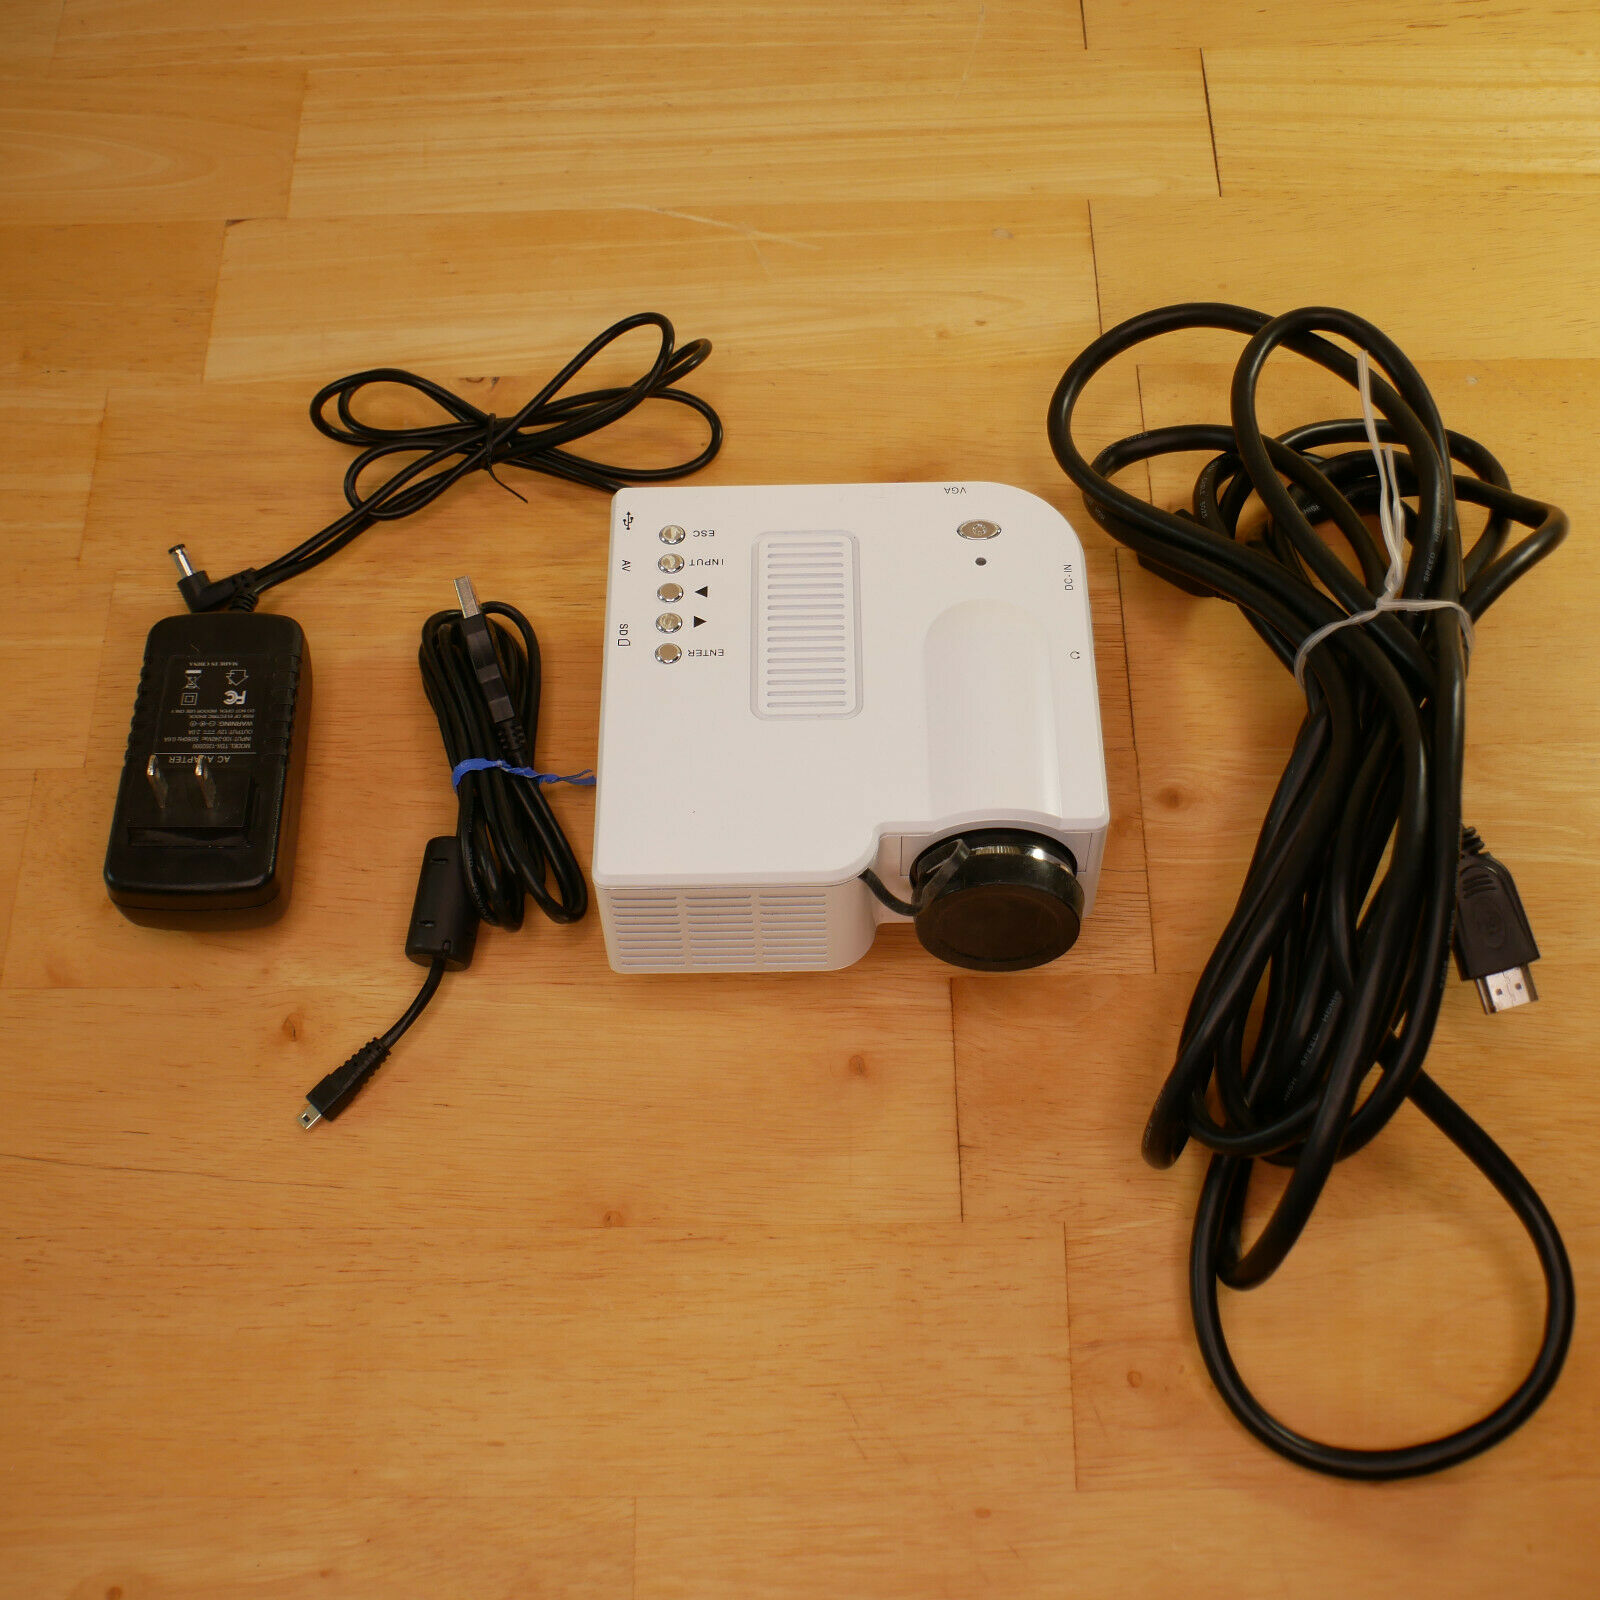 Mini Rohs Multimedia Projector Led 12vdc2a White W/ Cables Power Cord Sold As Is